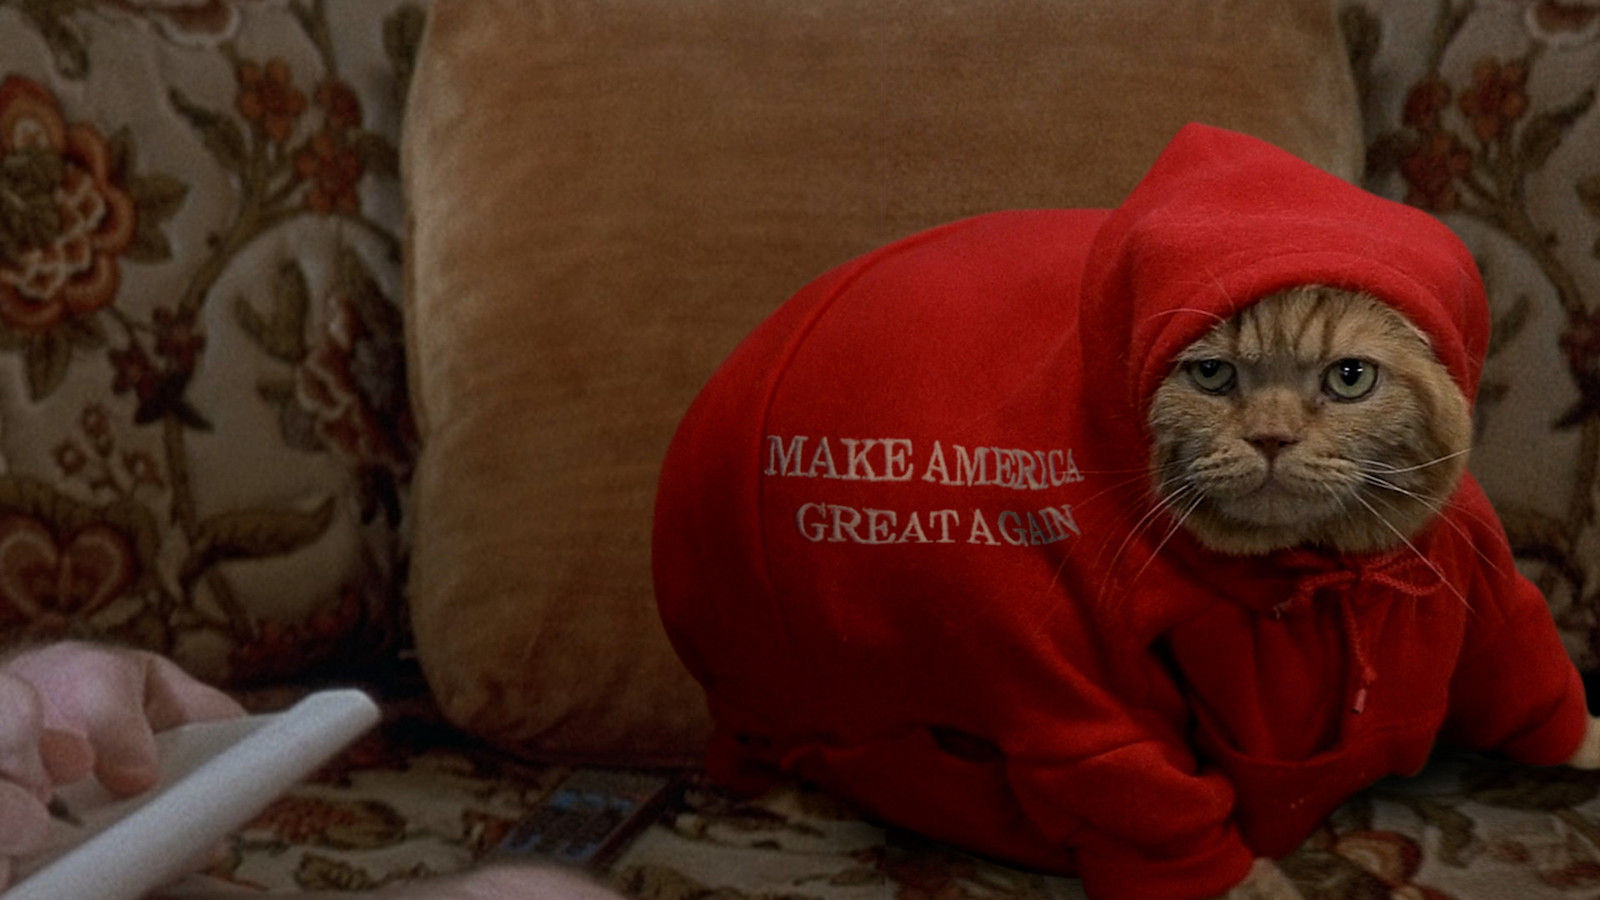 A grumpy cat wearing a red Make America Great Again sweatshirt looks at the camera